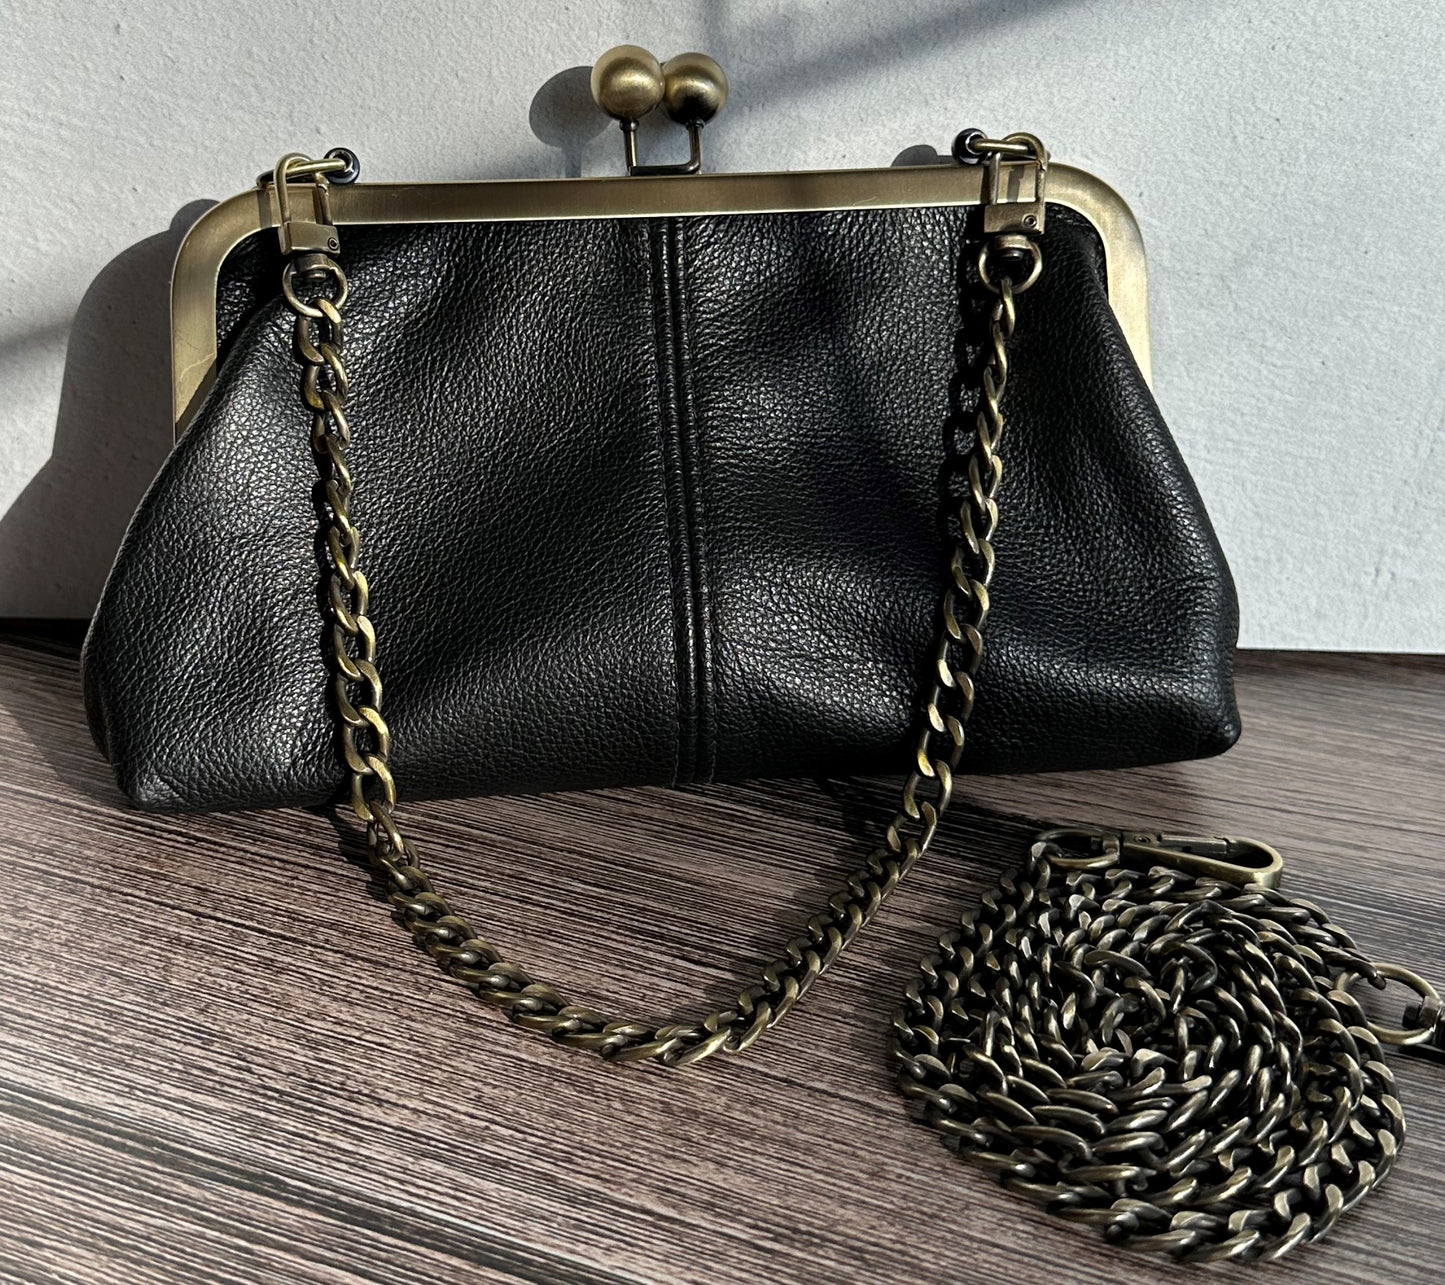 Black Leather with Bronze Kiss Lock & Chains Smith Island Purse SquiresCanvasCreations